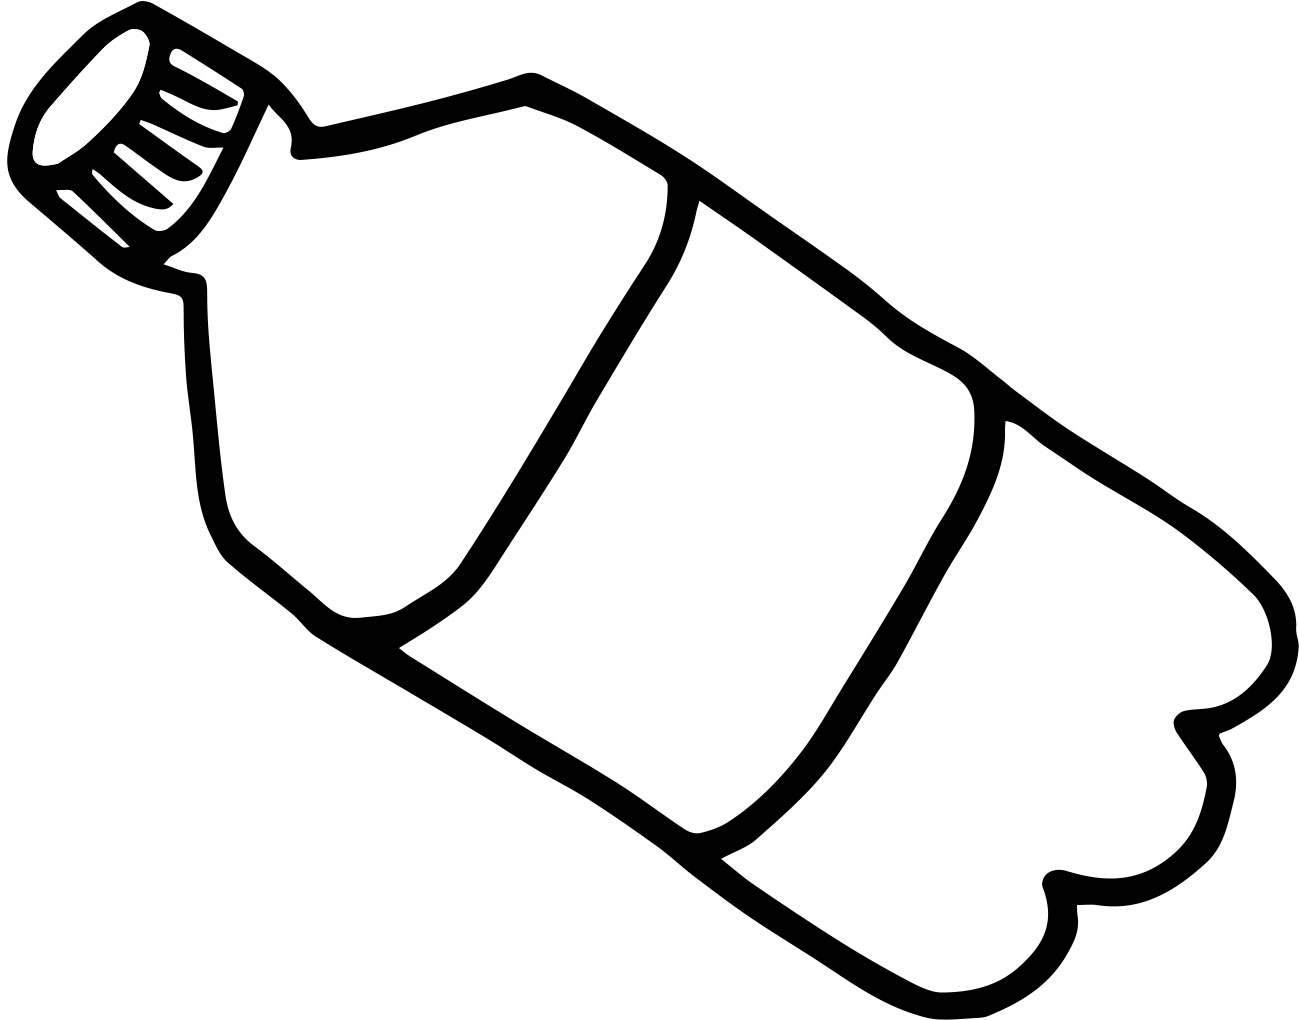 Plastic Bottle Mineral Water Drawing High-Res Vector Graphic - Getty Images